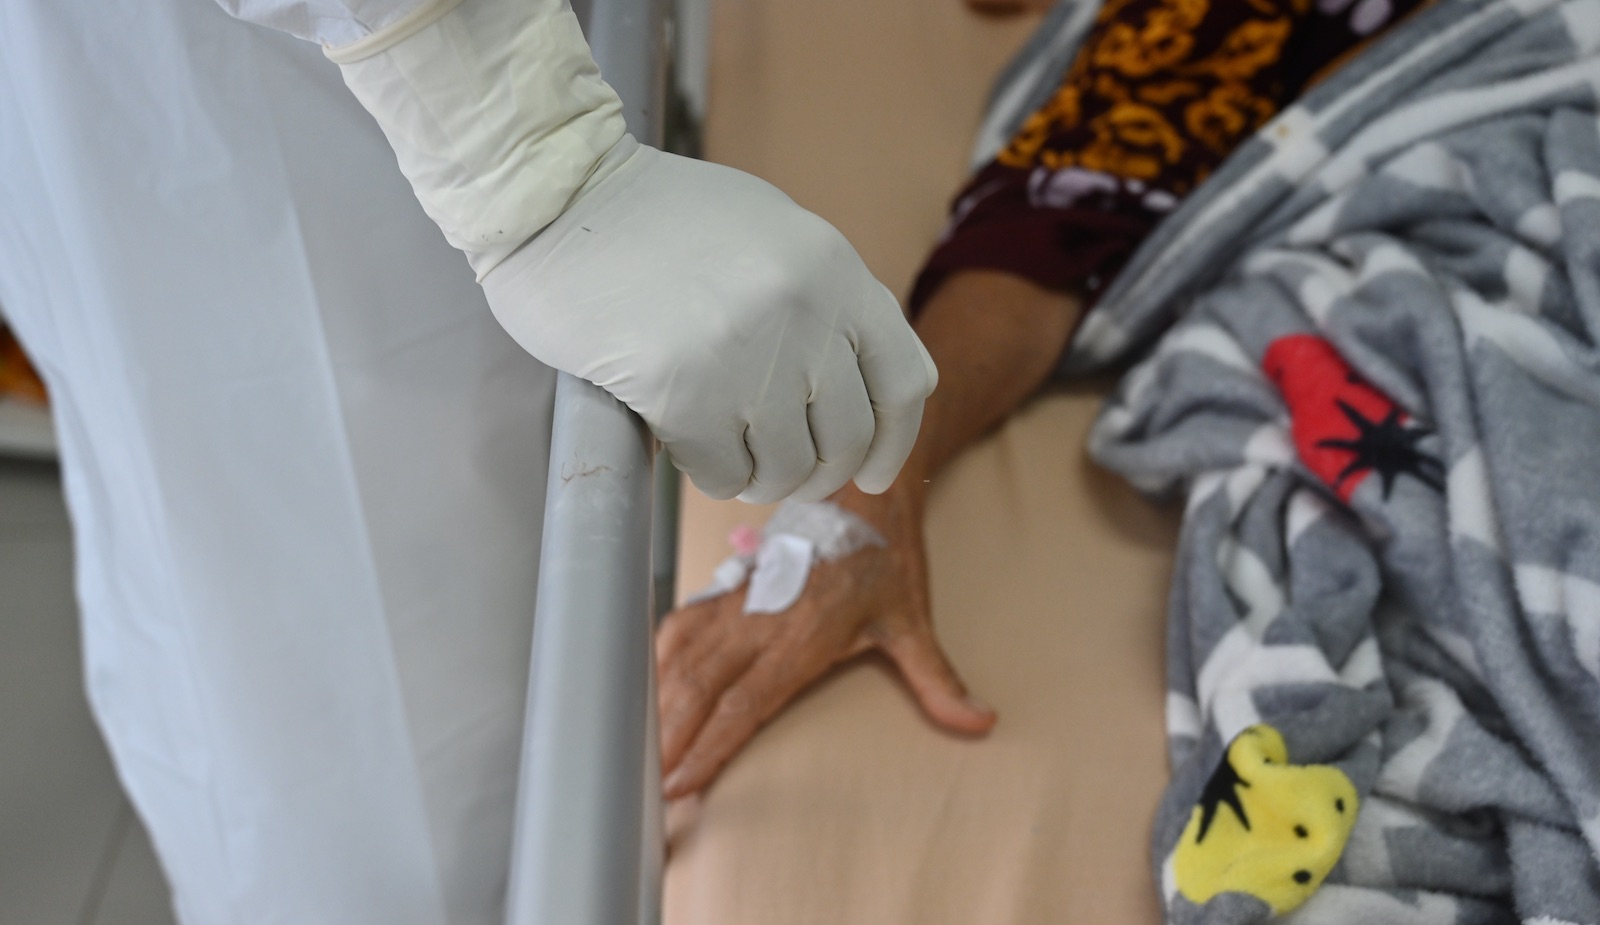 Long before the pandemic, Indonesia has been consistently underinvesting in its health sector: A Covid-19 patient at a general hospital in Bogor in January (Adek Berry/AFP via Getty Images)